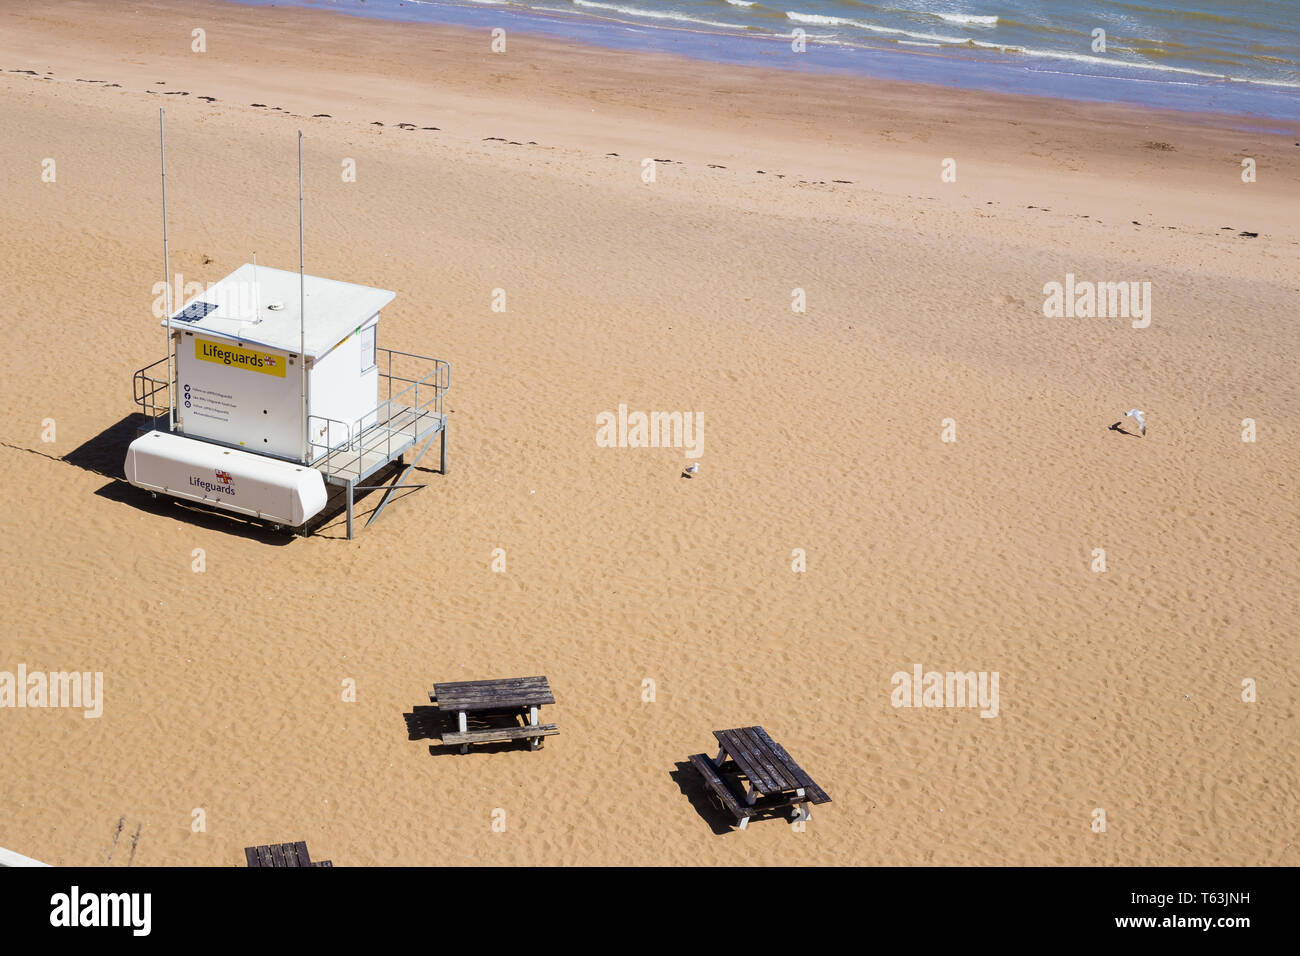 Broadstairs, Kent. UK. A white lifeguard hut on an empty sandy beach in spring on a sunny day. Two empty picnic tables can be seen. Stock Photo